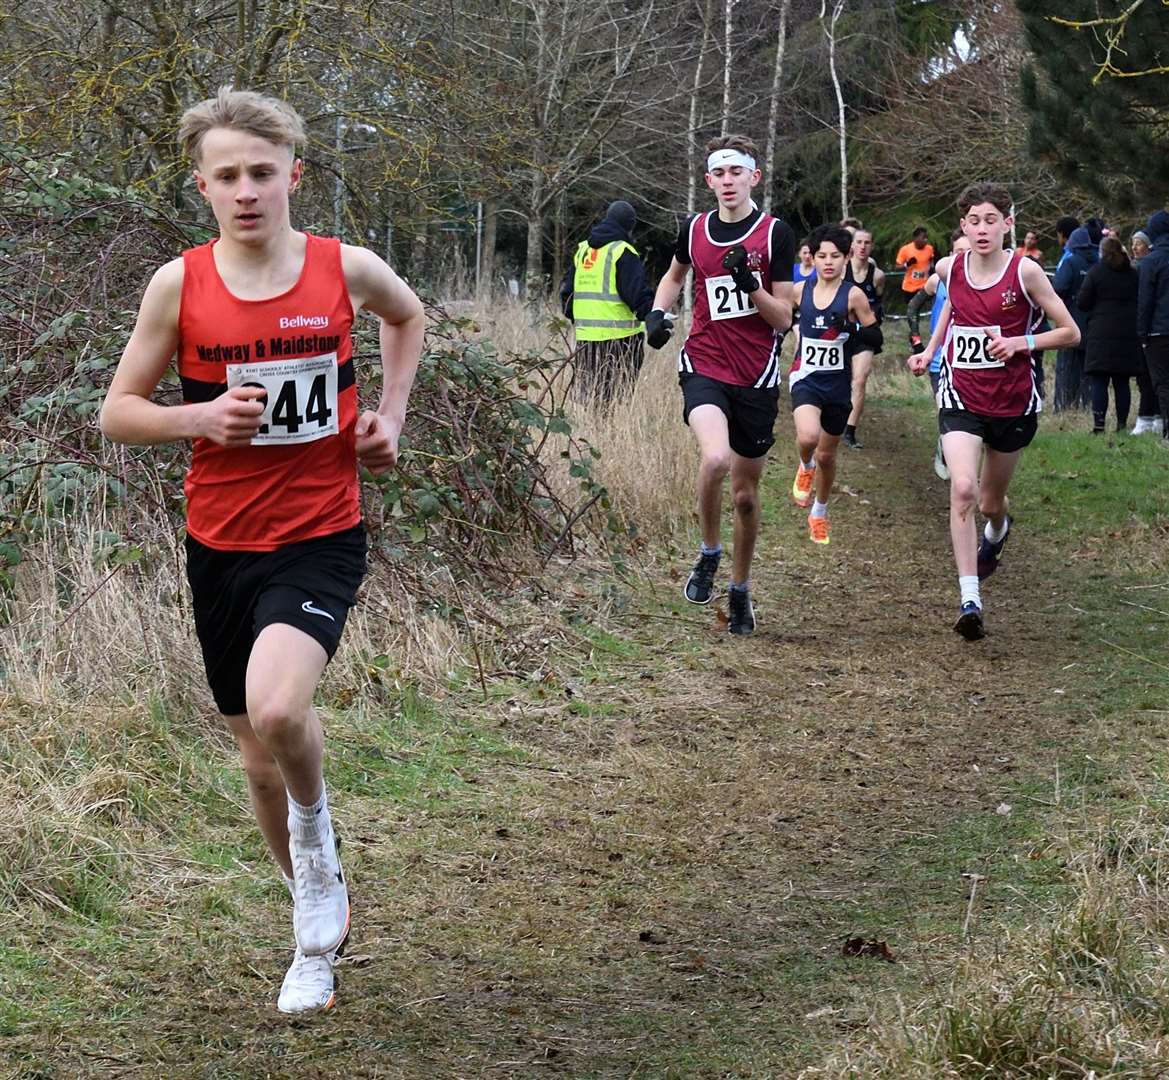 Maidstone’s Freddie Gibson sets the pace in the junior boys’ race. Picture: Simon Hildrew